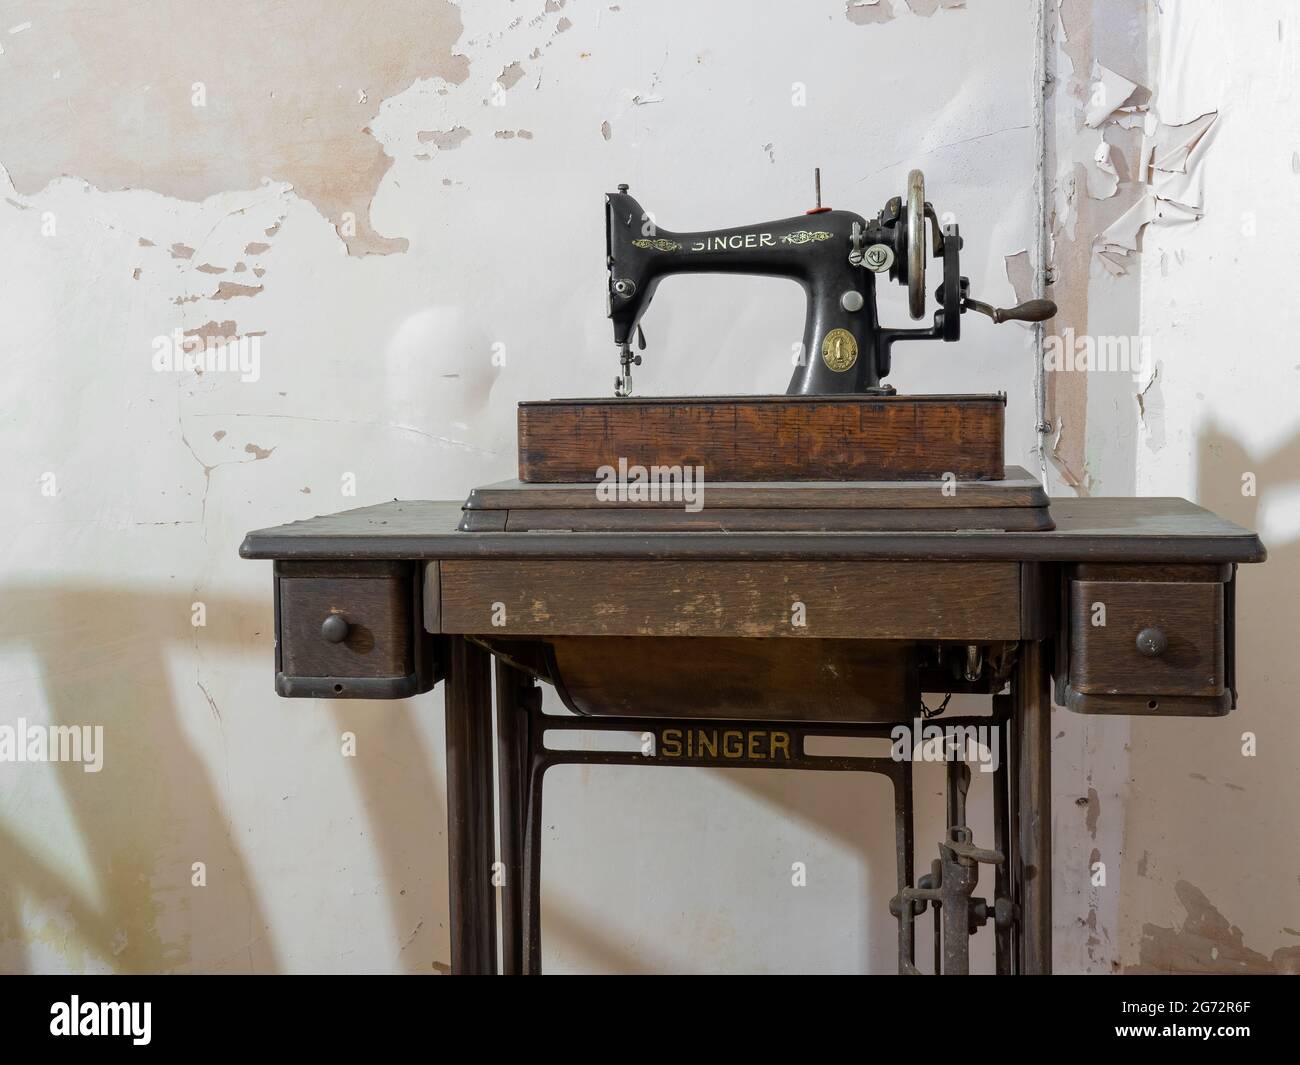 EXETER, UK - JUNE 29 2021: Old Singer treadle sewing machine in abandoned house. Stock Photo